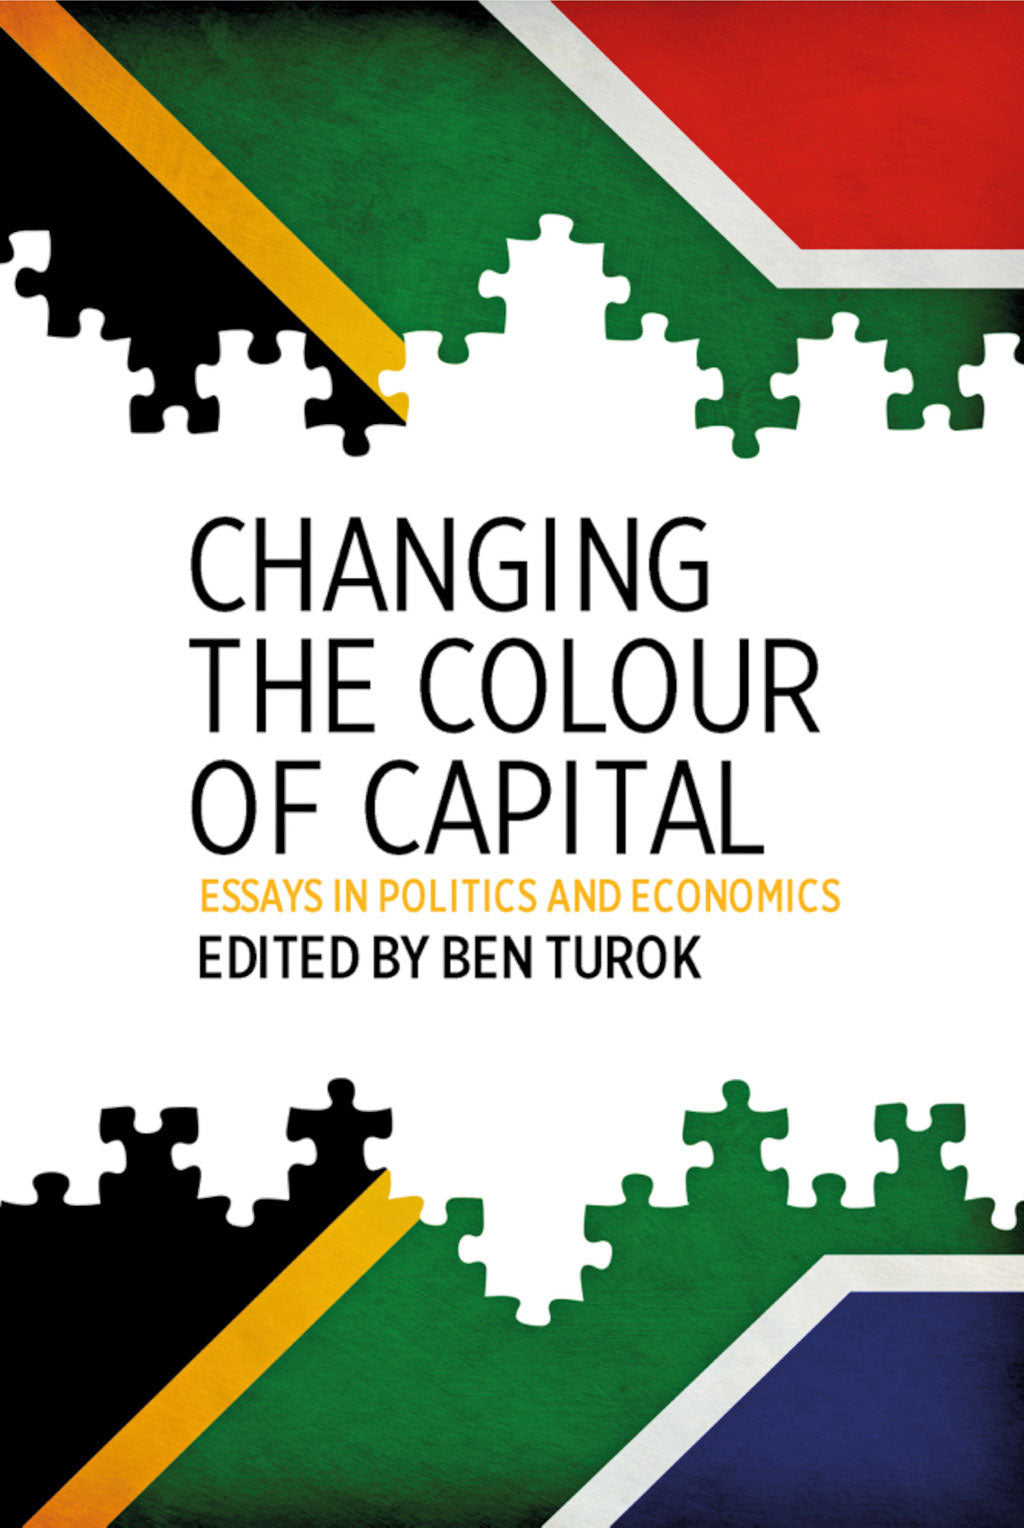 CHANGING THE COLOUR OF CAPITAL